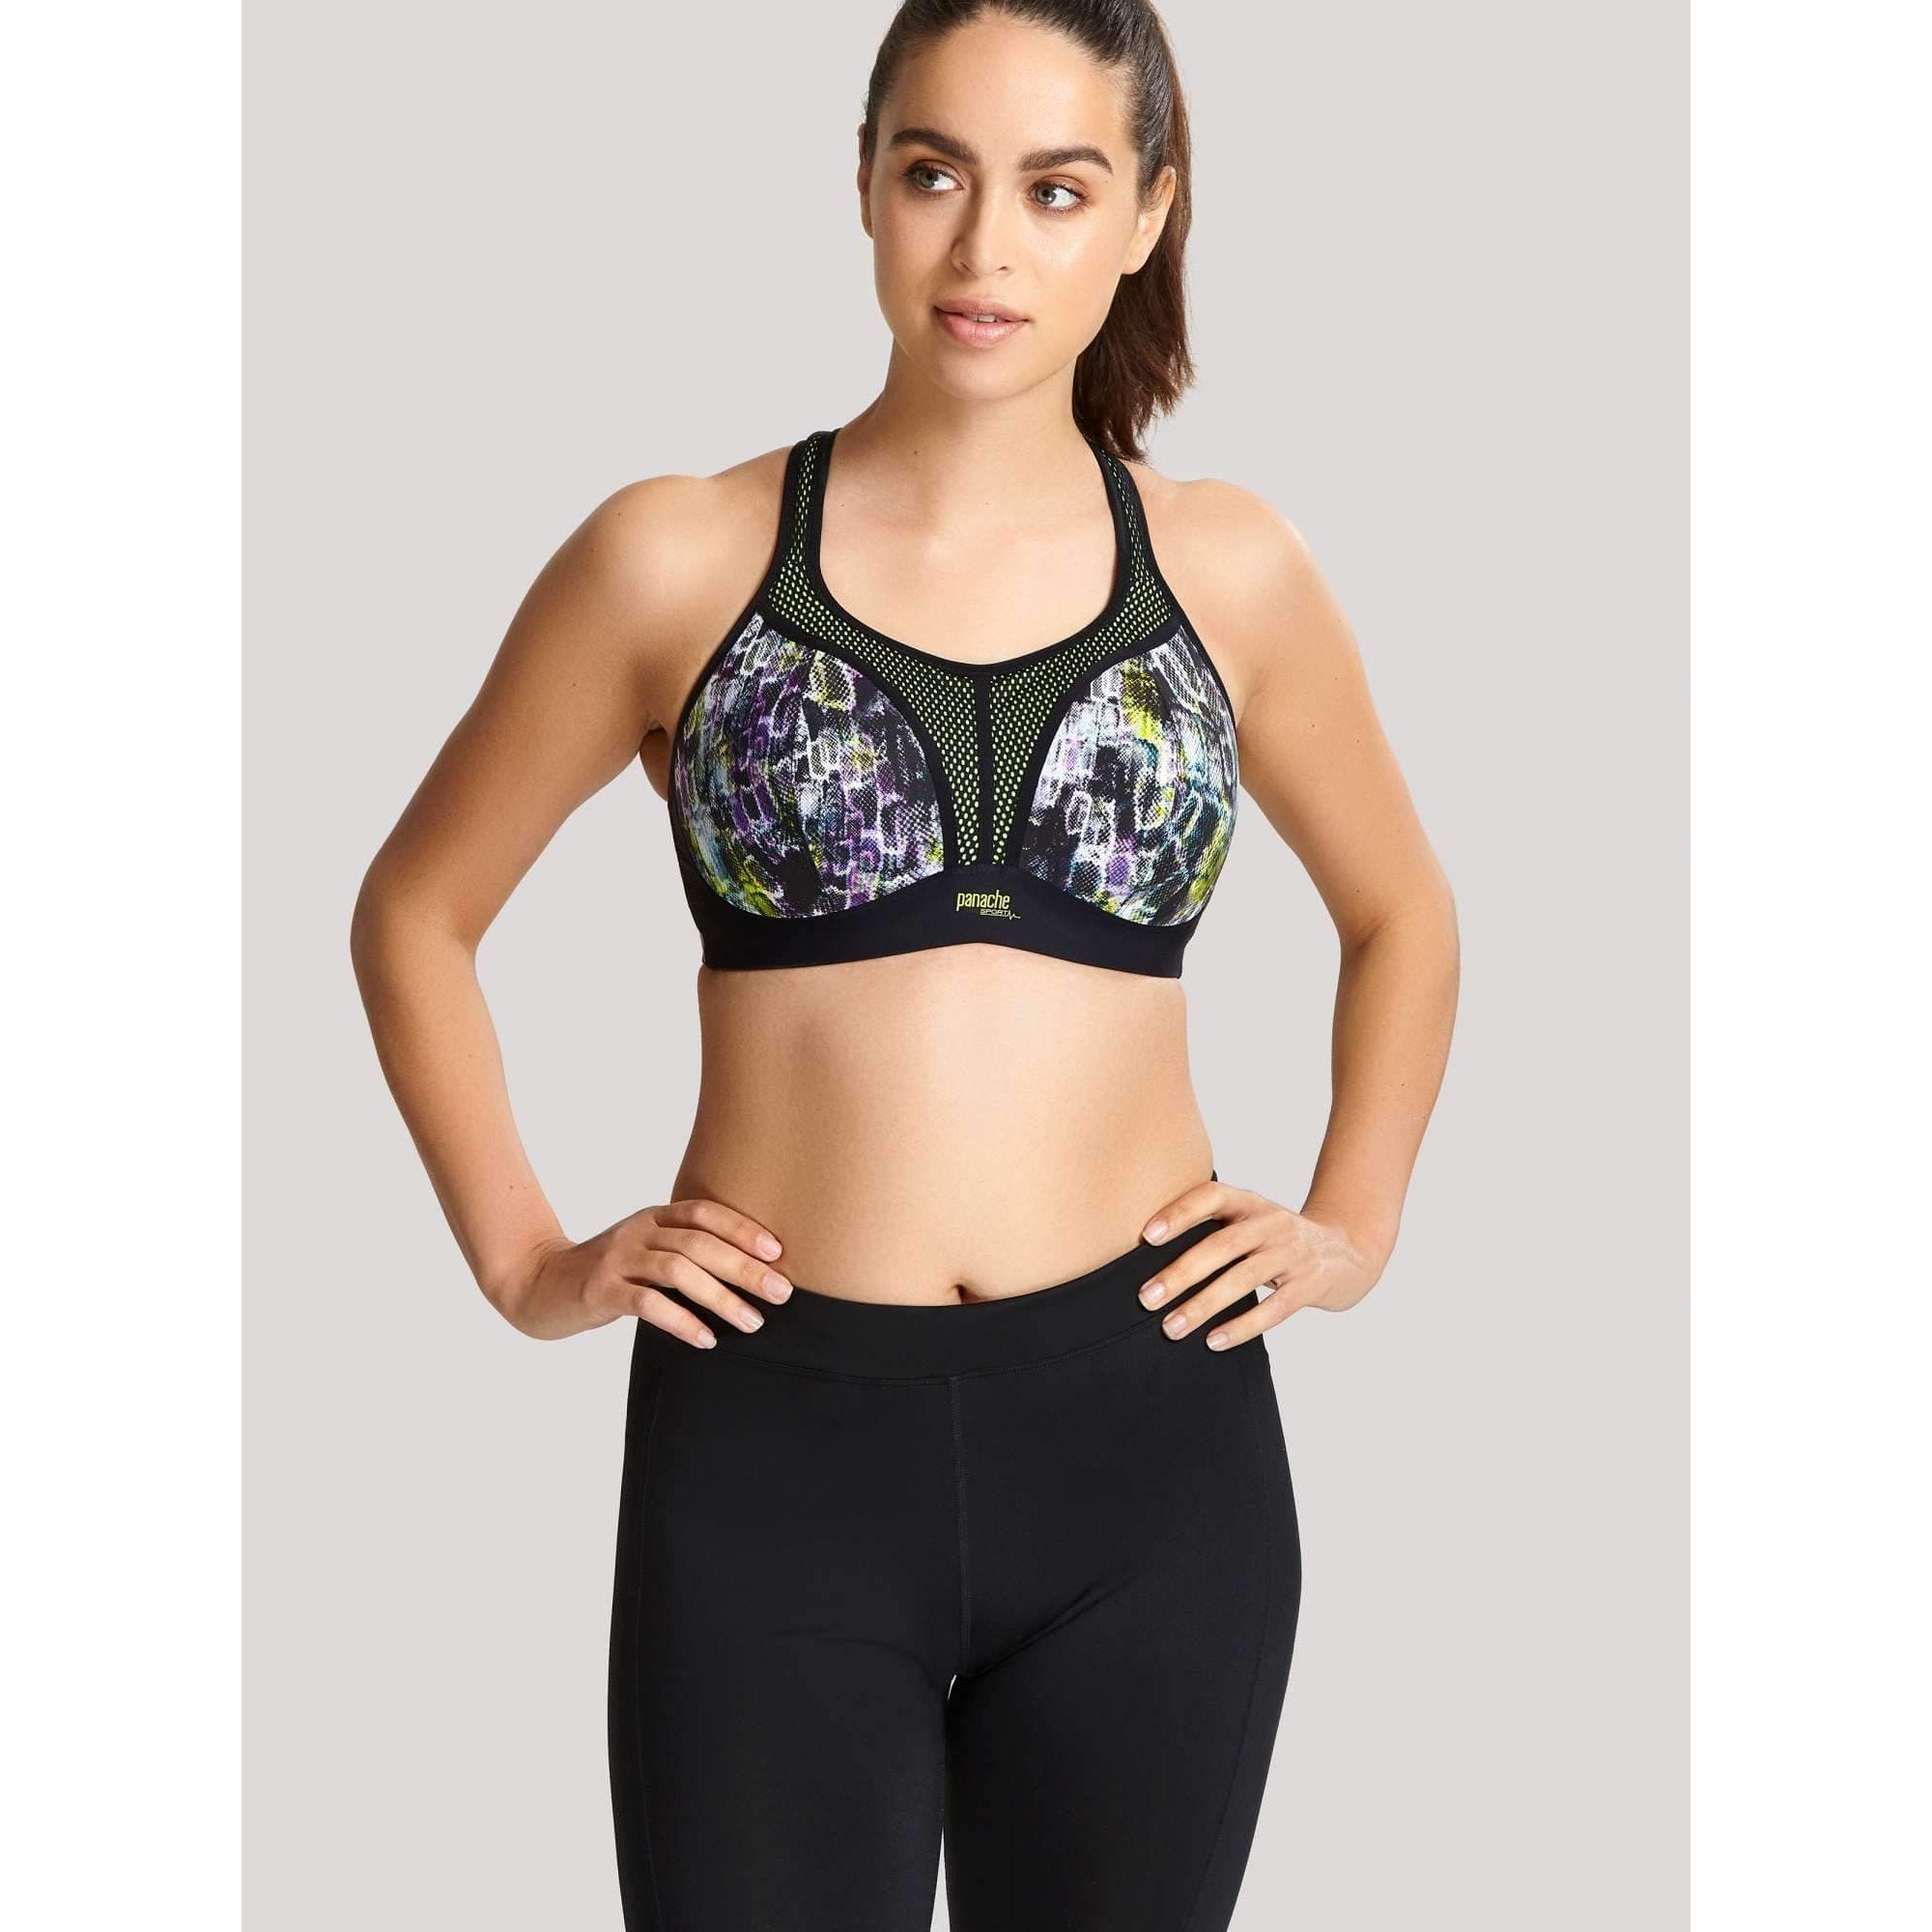 Panache Sports Wire Free 7341A - Sports Wirefree Bra Neon Reptile / 14DD  Available at Illusions Lingerie